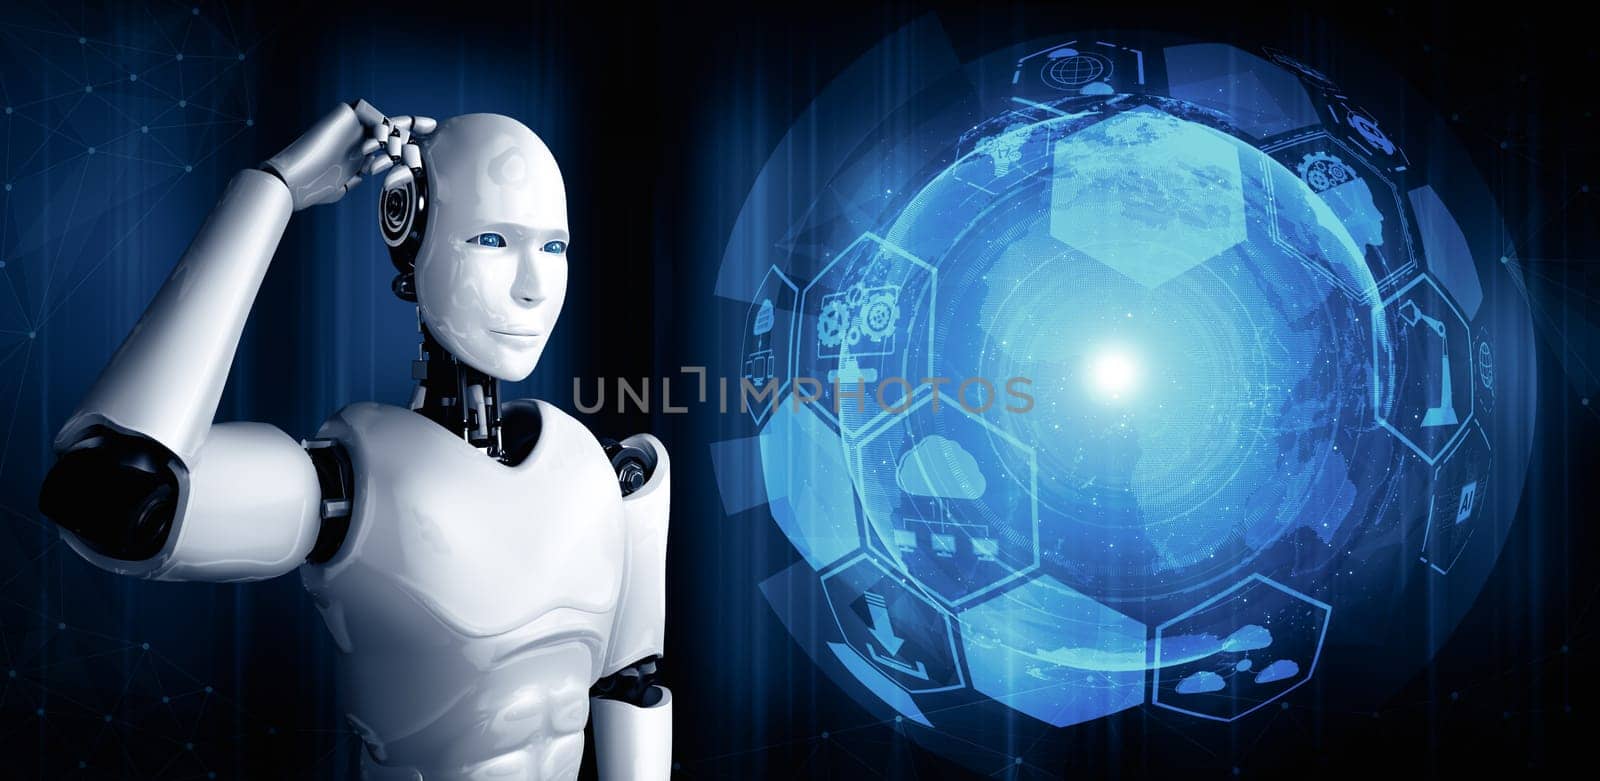 XAI Thinking AI humanoid robot analyzing hologram screen shows concept of network by biancoblue